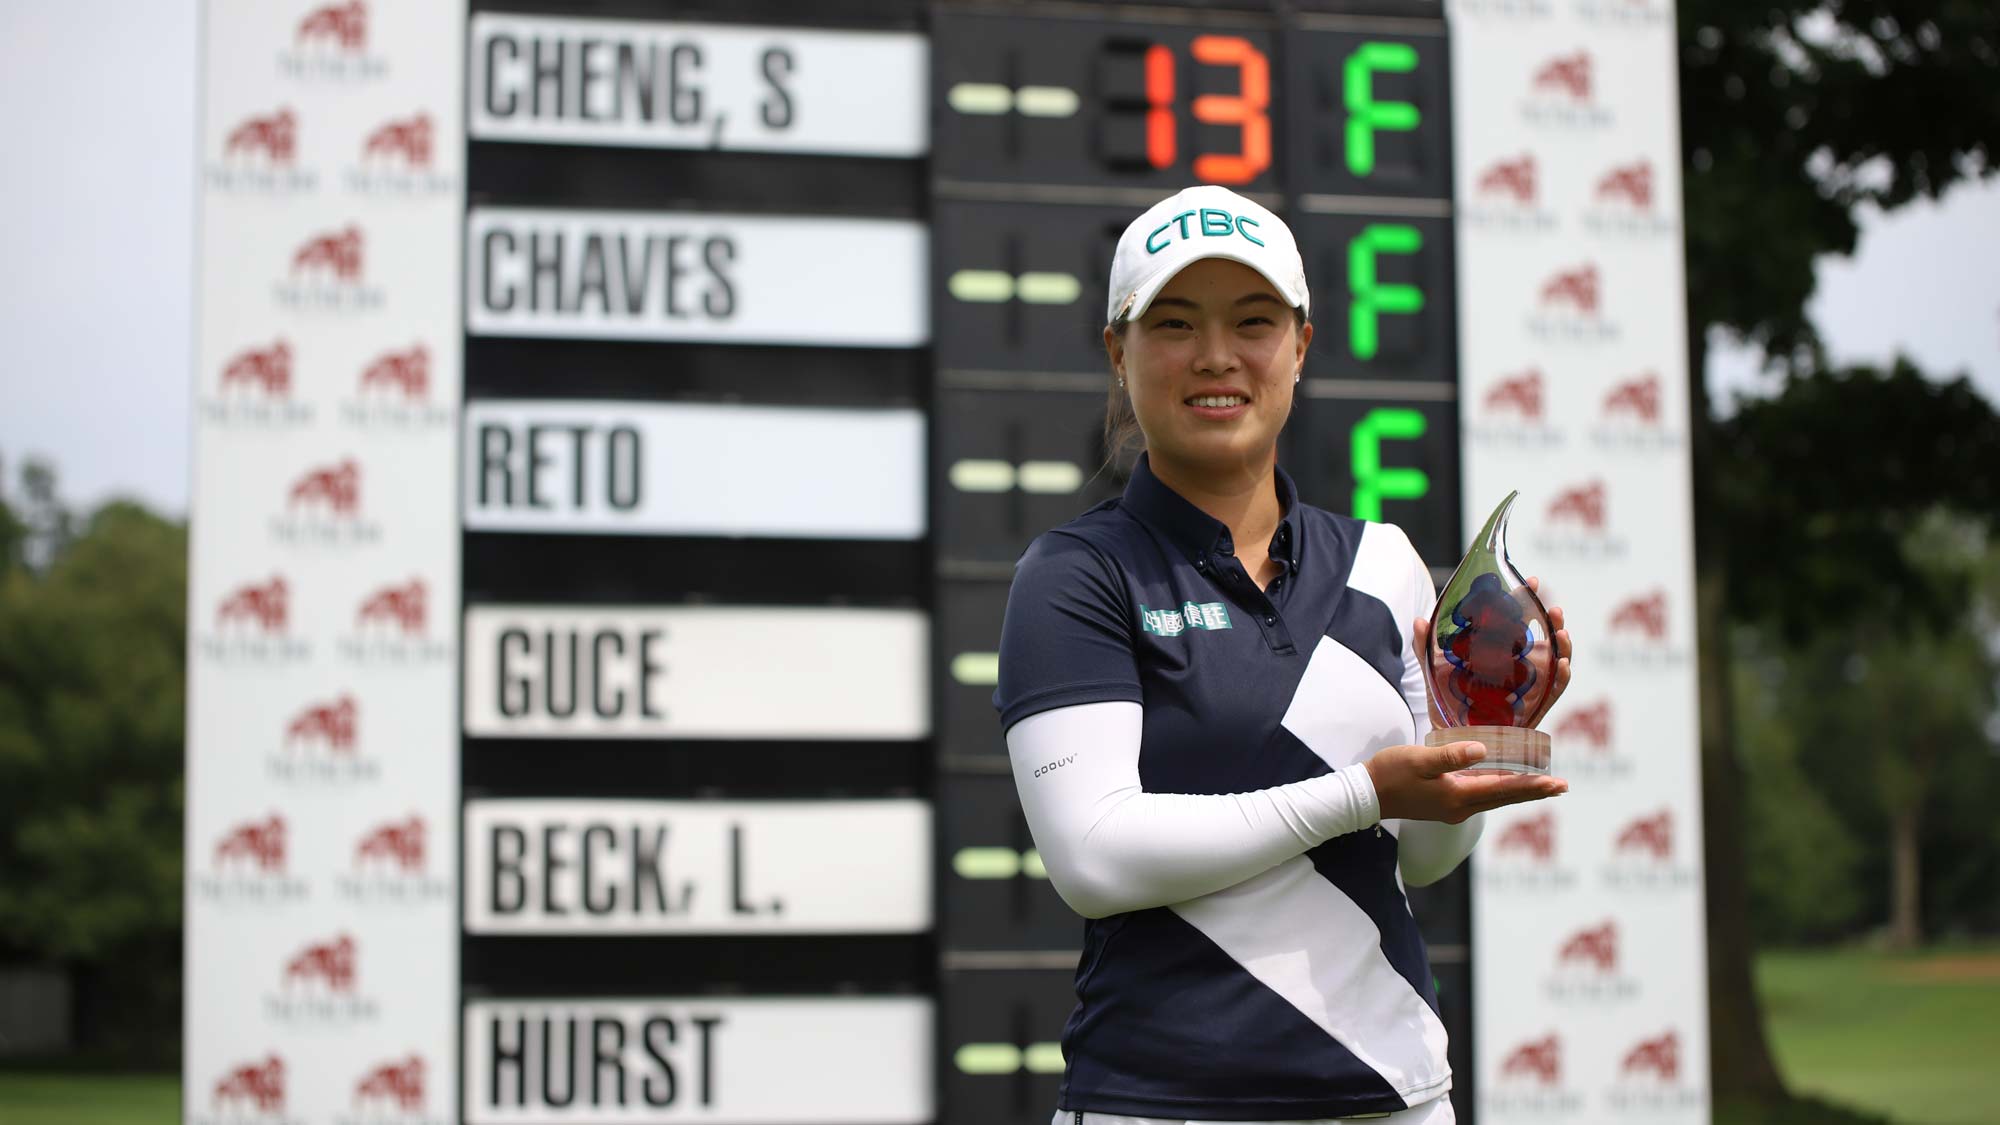 Ssu-Chia Cheng with trophy at leaderboard